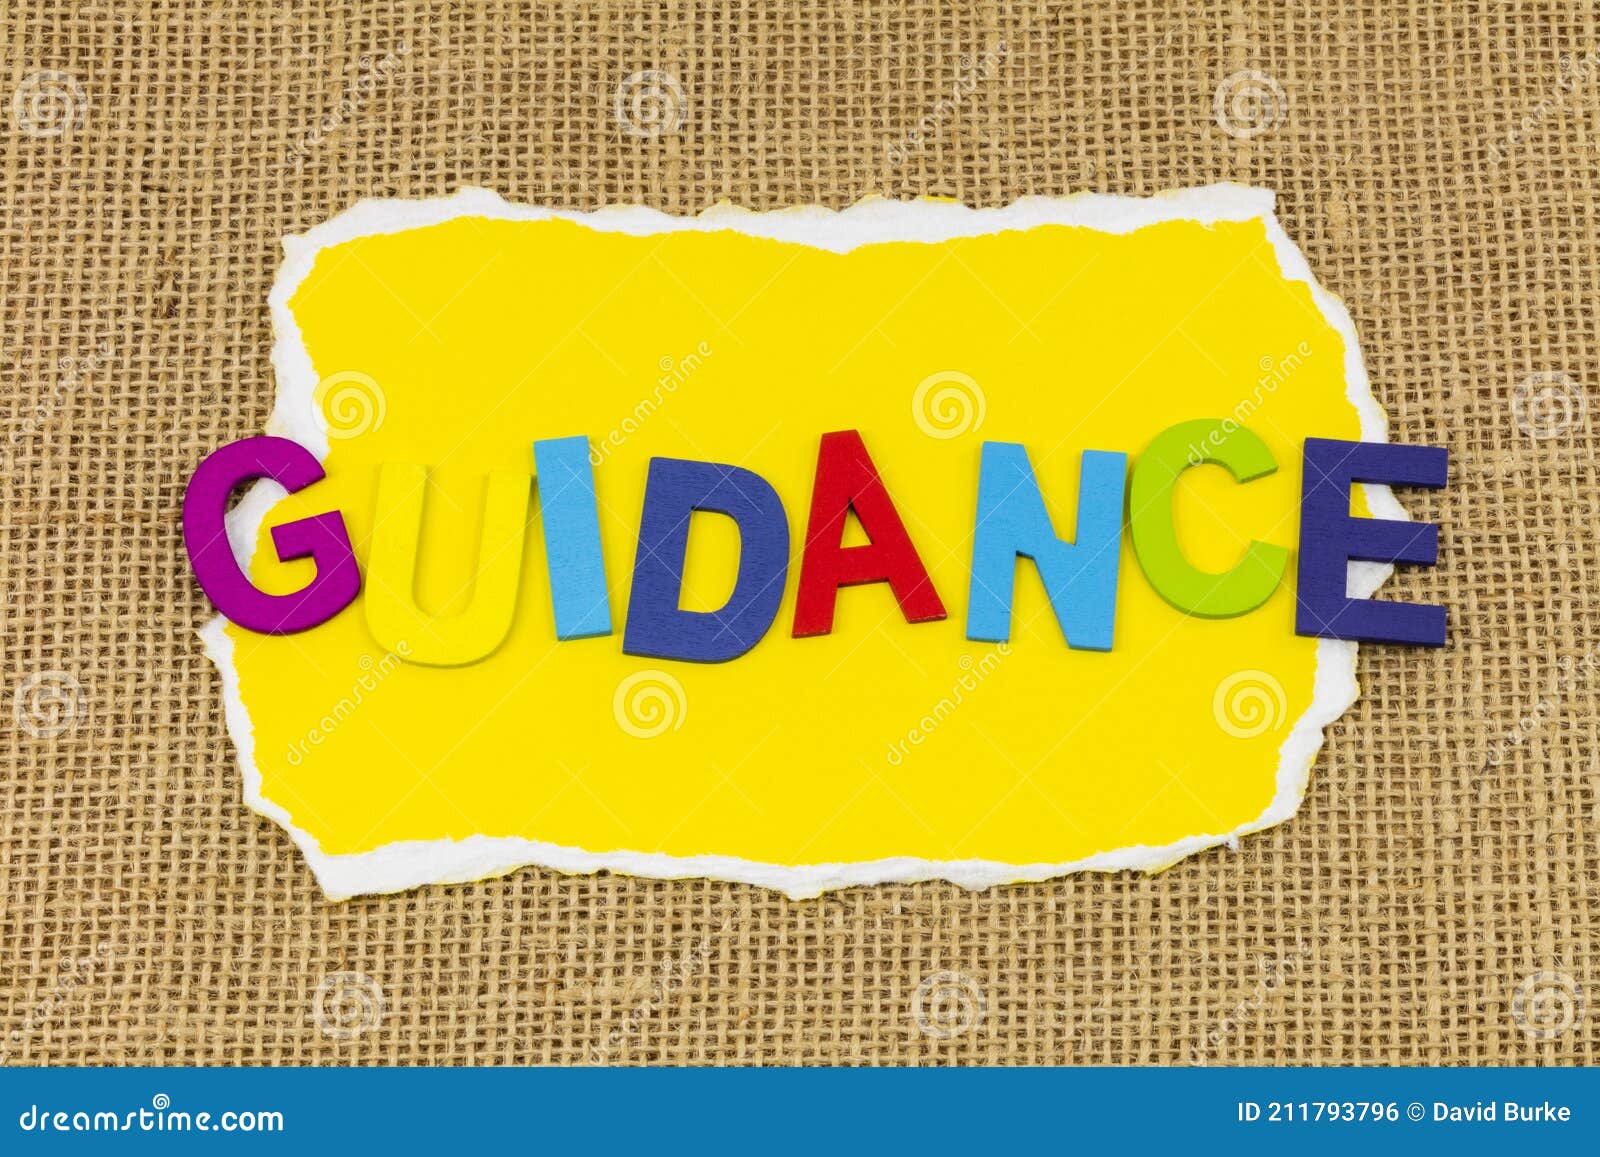 guidance counselor business advice support guide assistance information